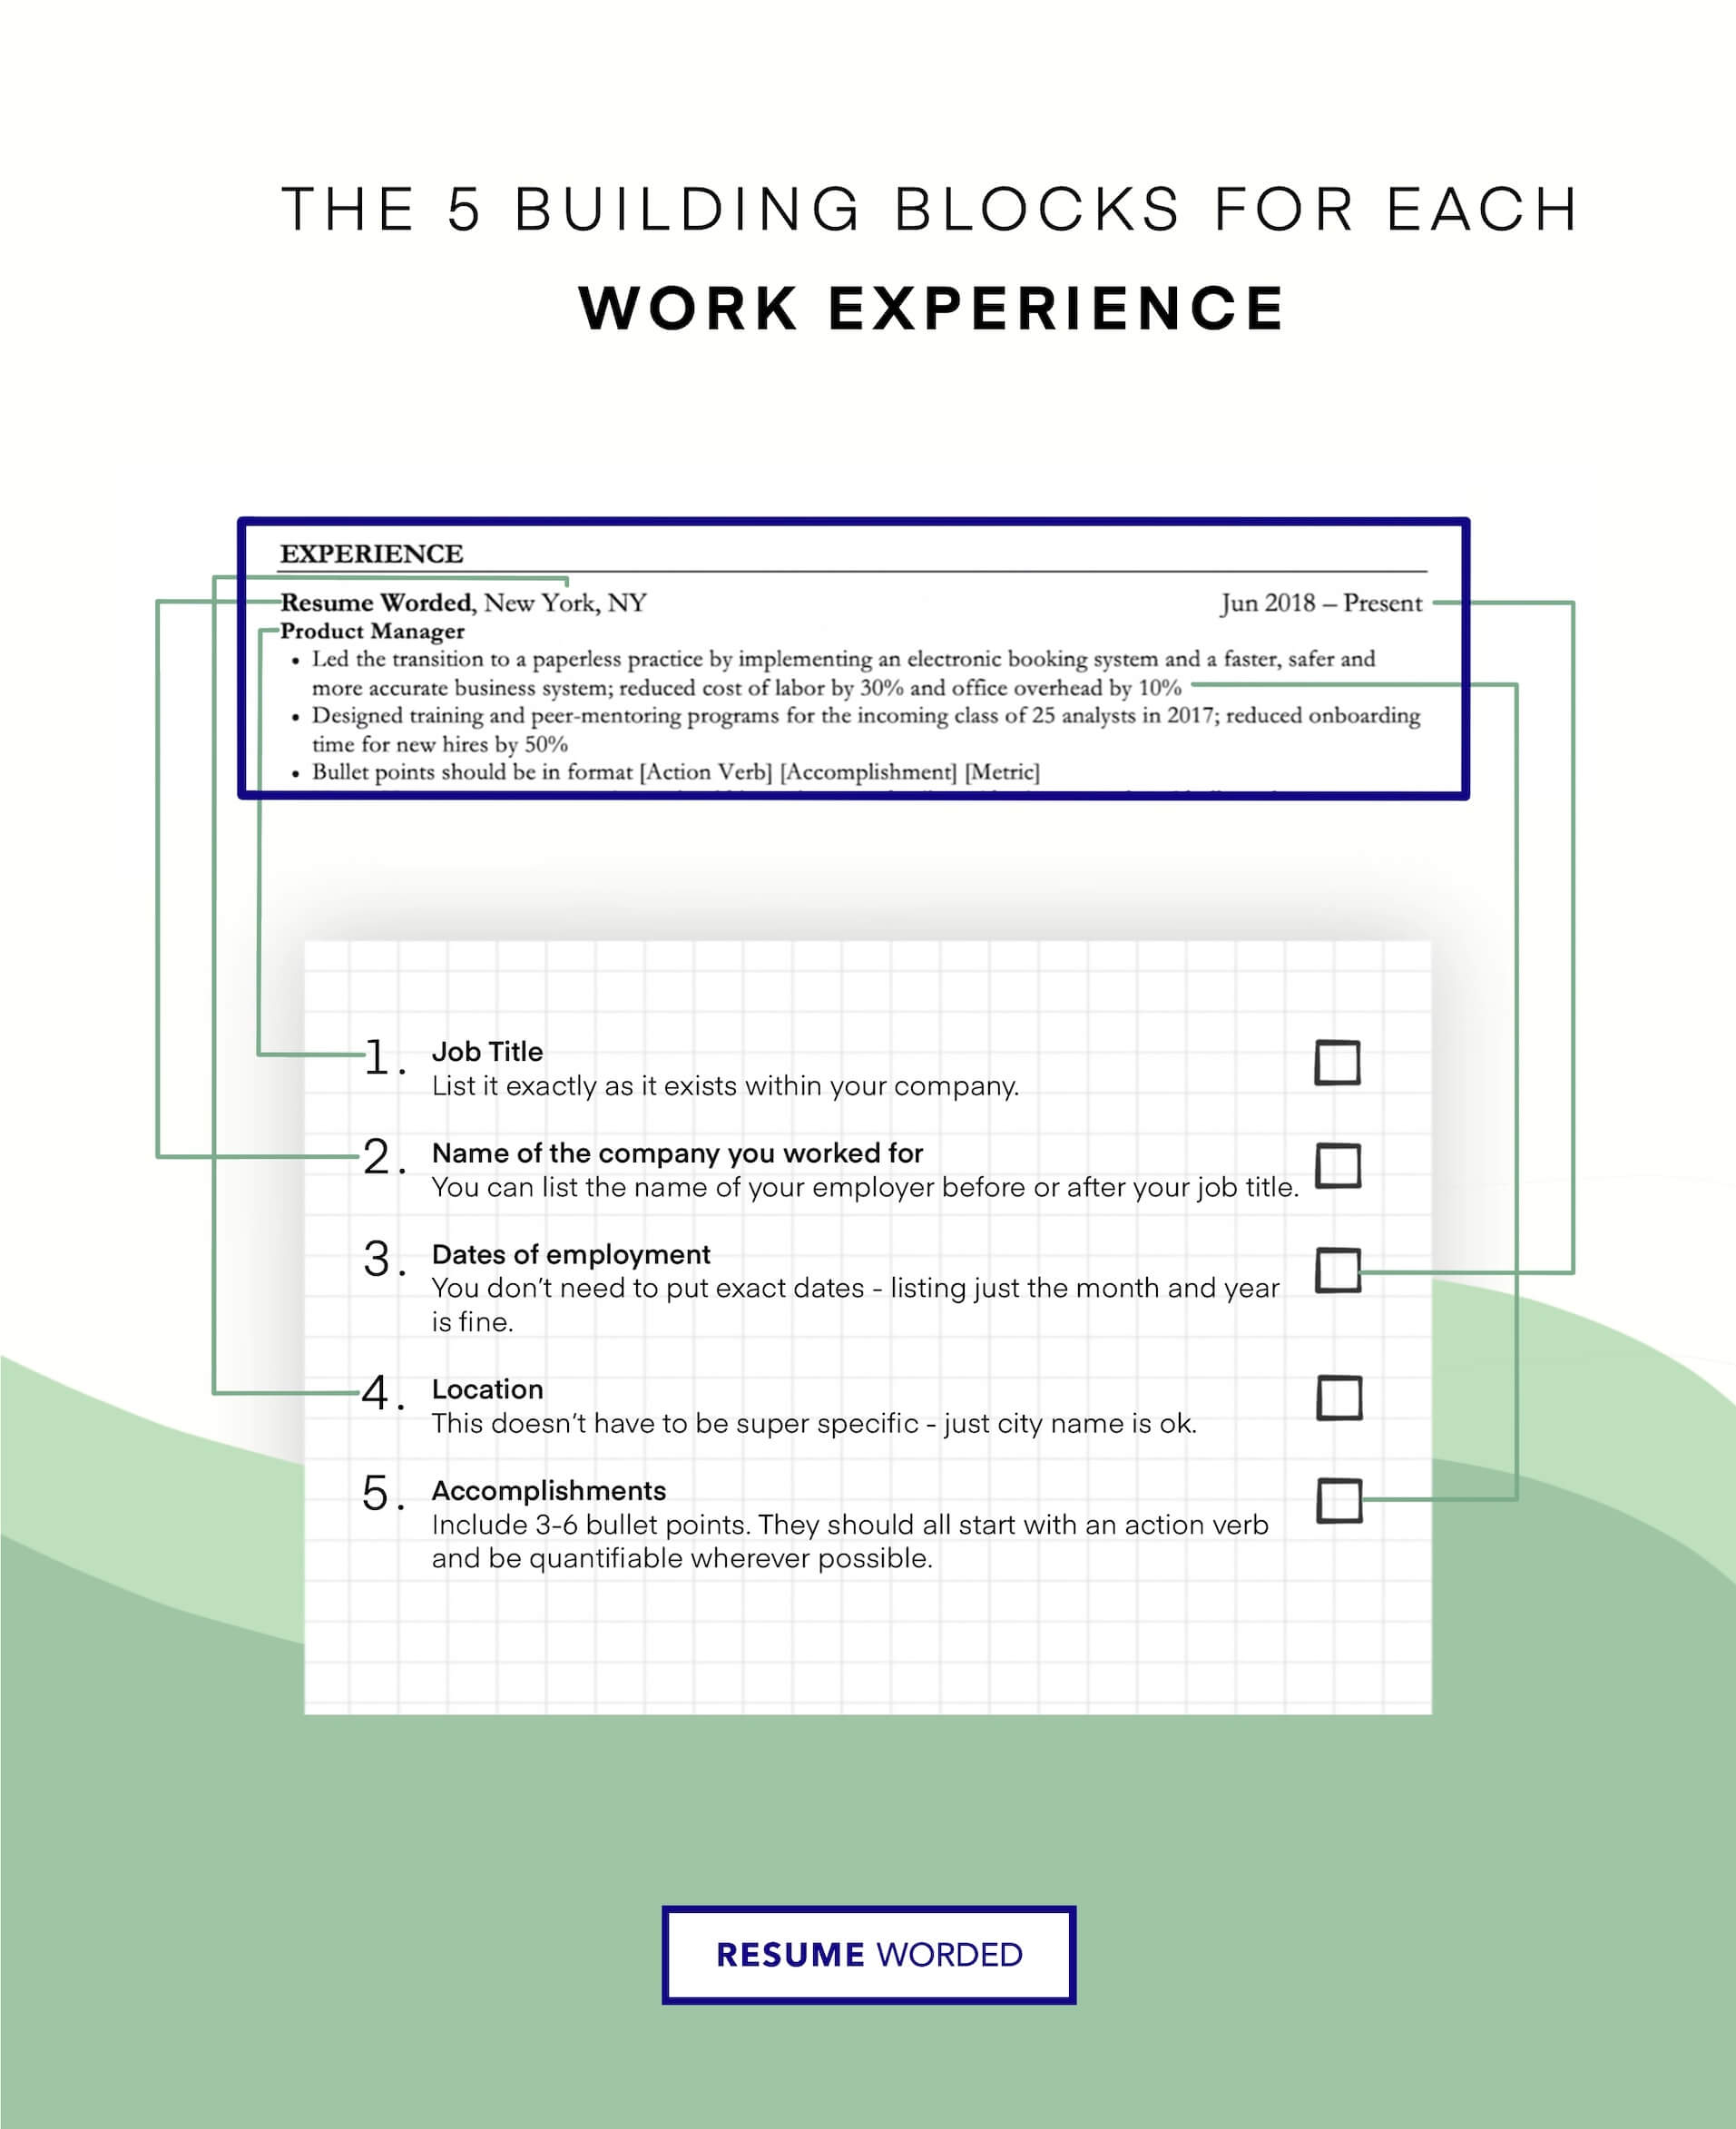 Showcase hands-on experience - Junior Network Administrator Resume